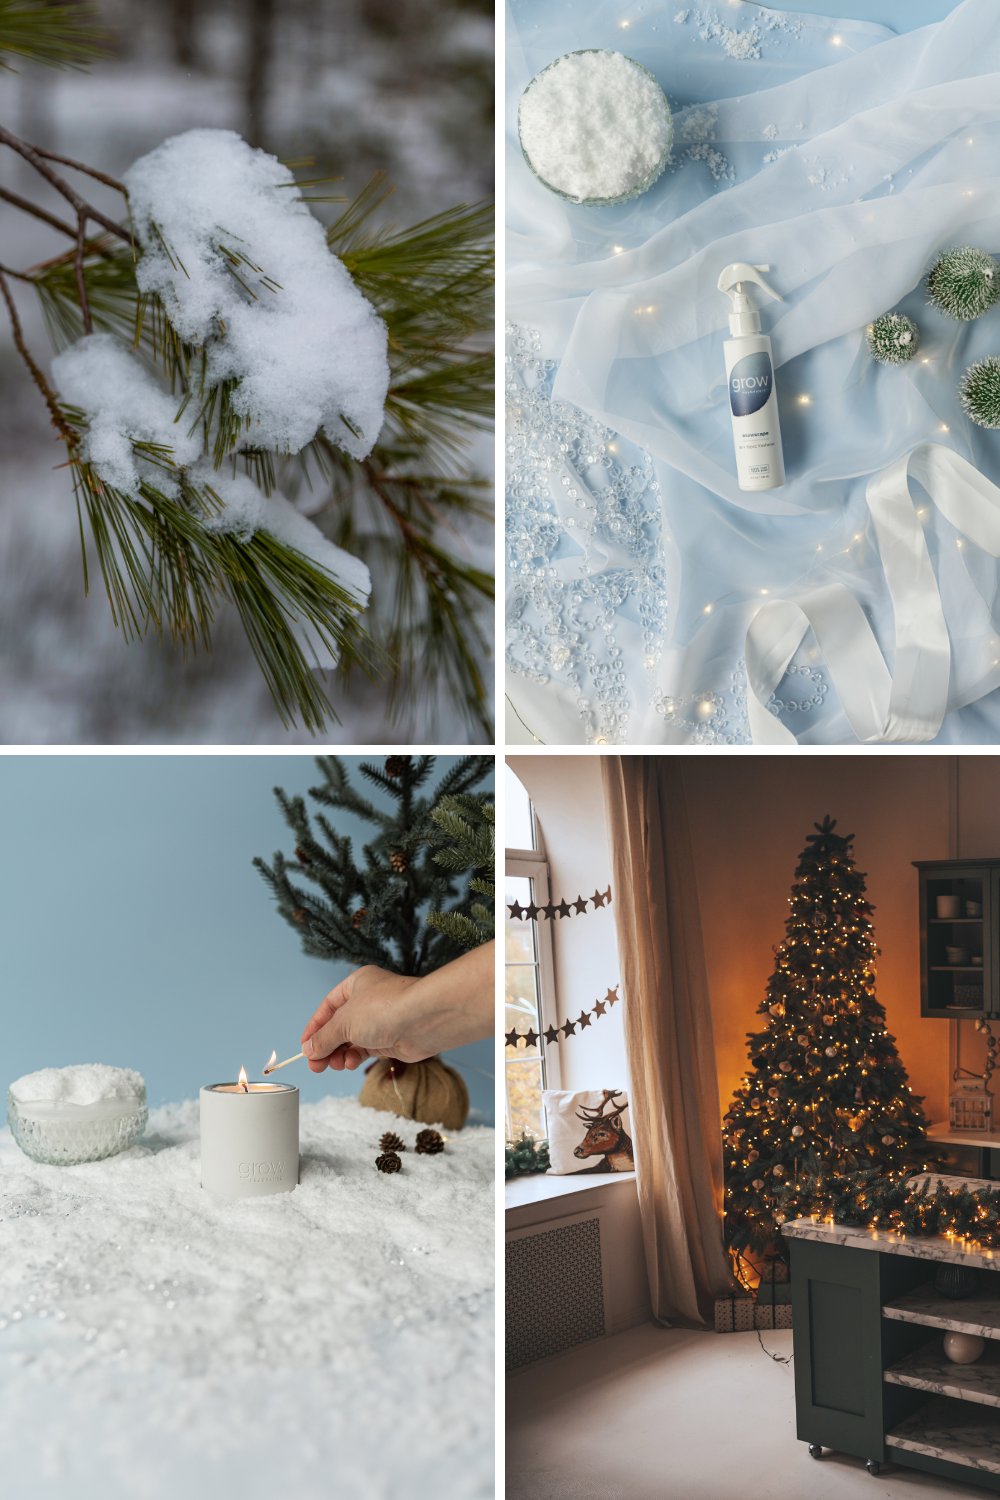 A comprehensive winter scent cleaning guide featuring fresh fallen snow, winter mint, vanilla, and pine-scented candle and spray. Learn how to keep your home smelling fresh with non-toxic air and fabric fresheners and candle